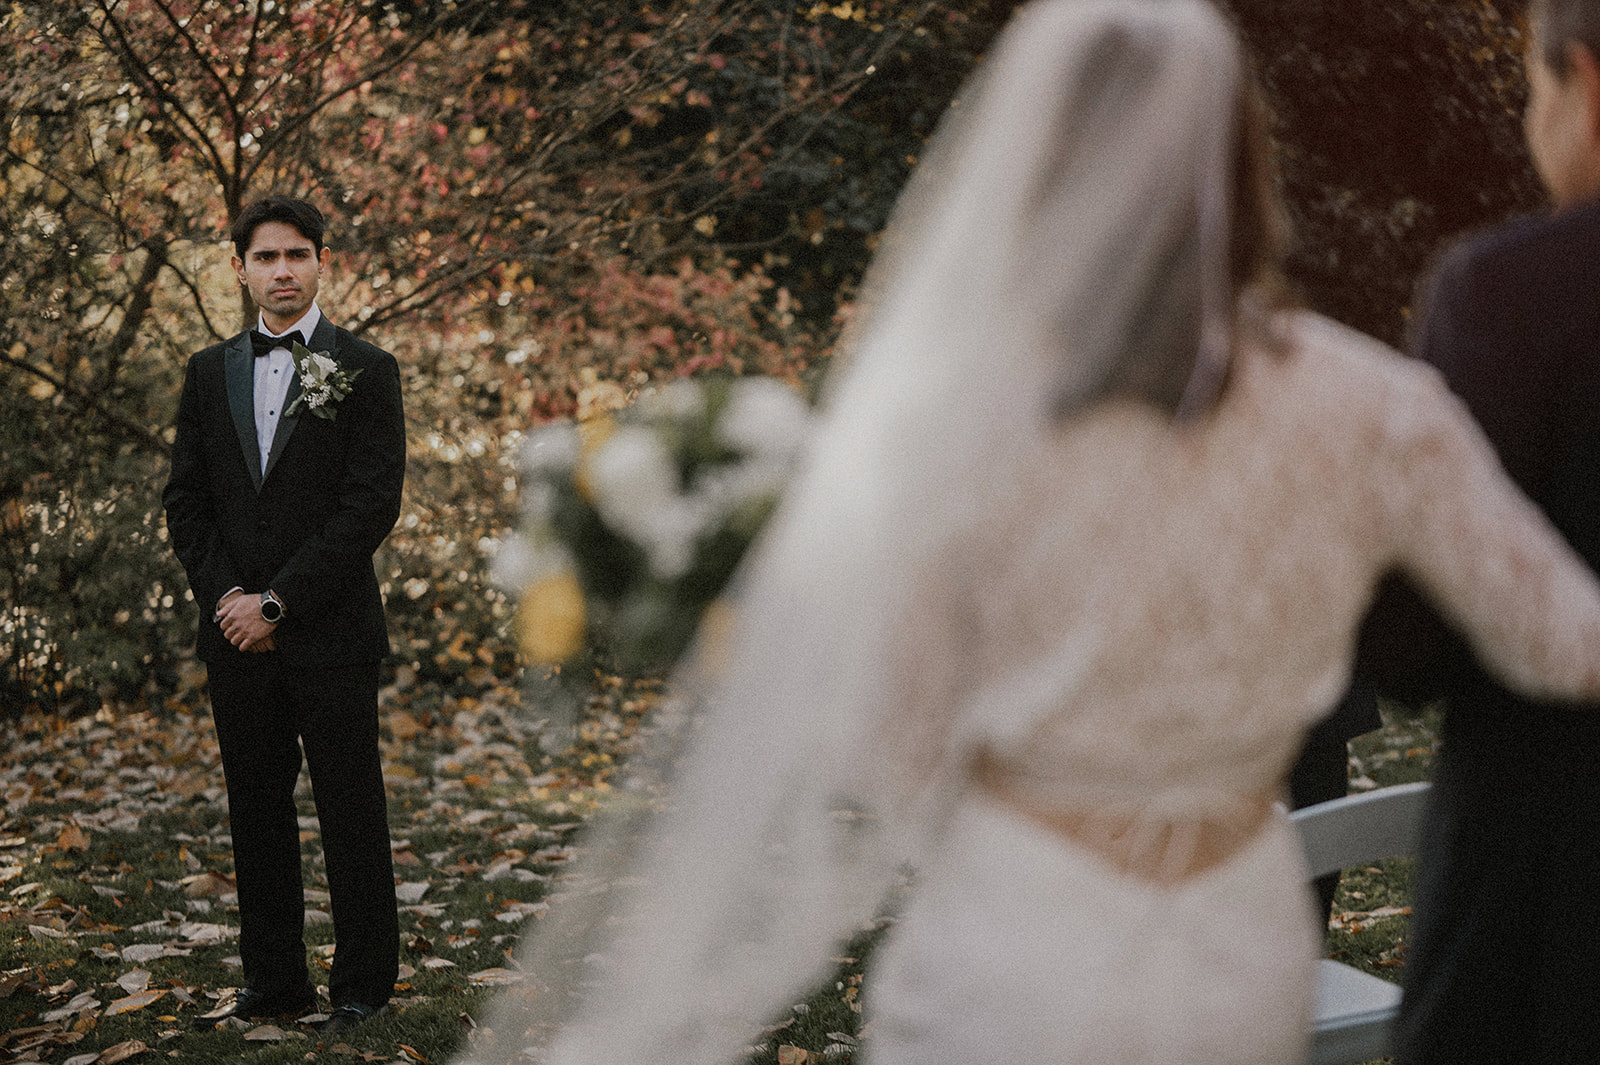 back view of bride walking down the aisle with groom looking at her in background surrounded by fall foliage